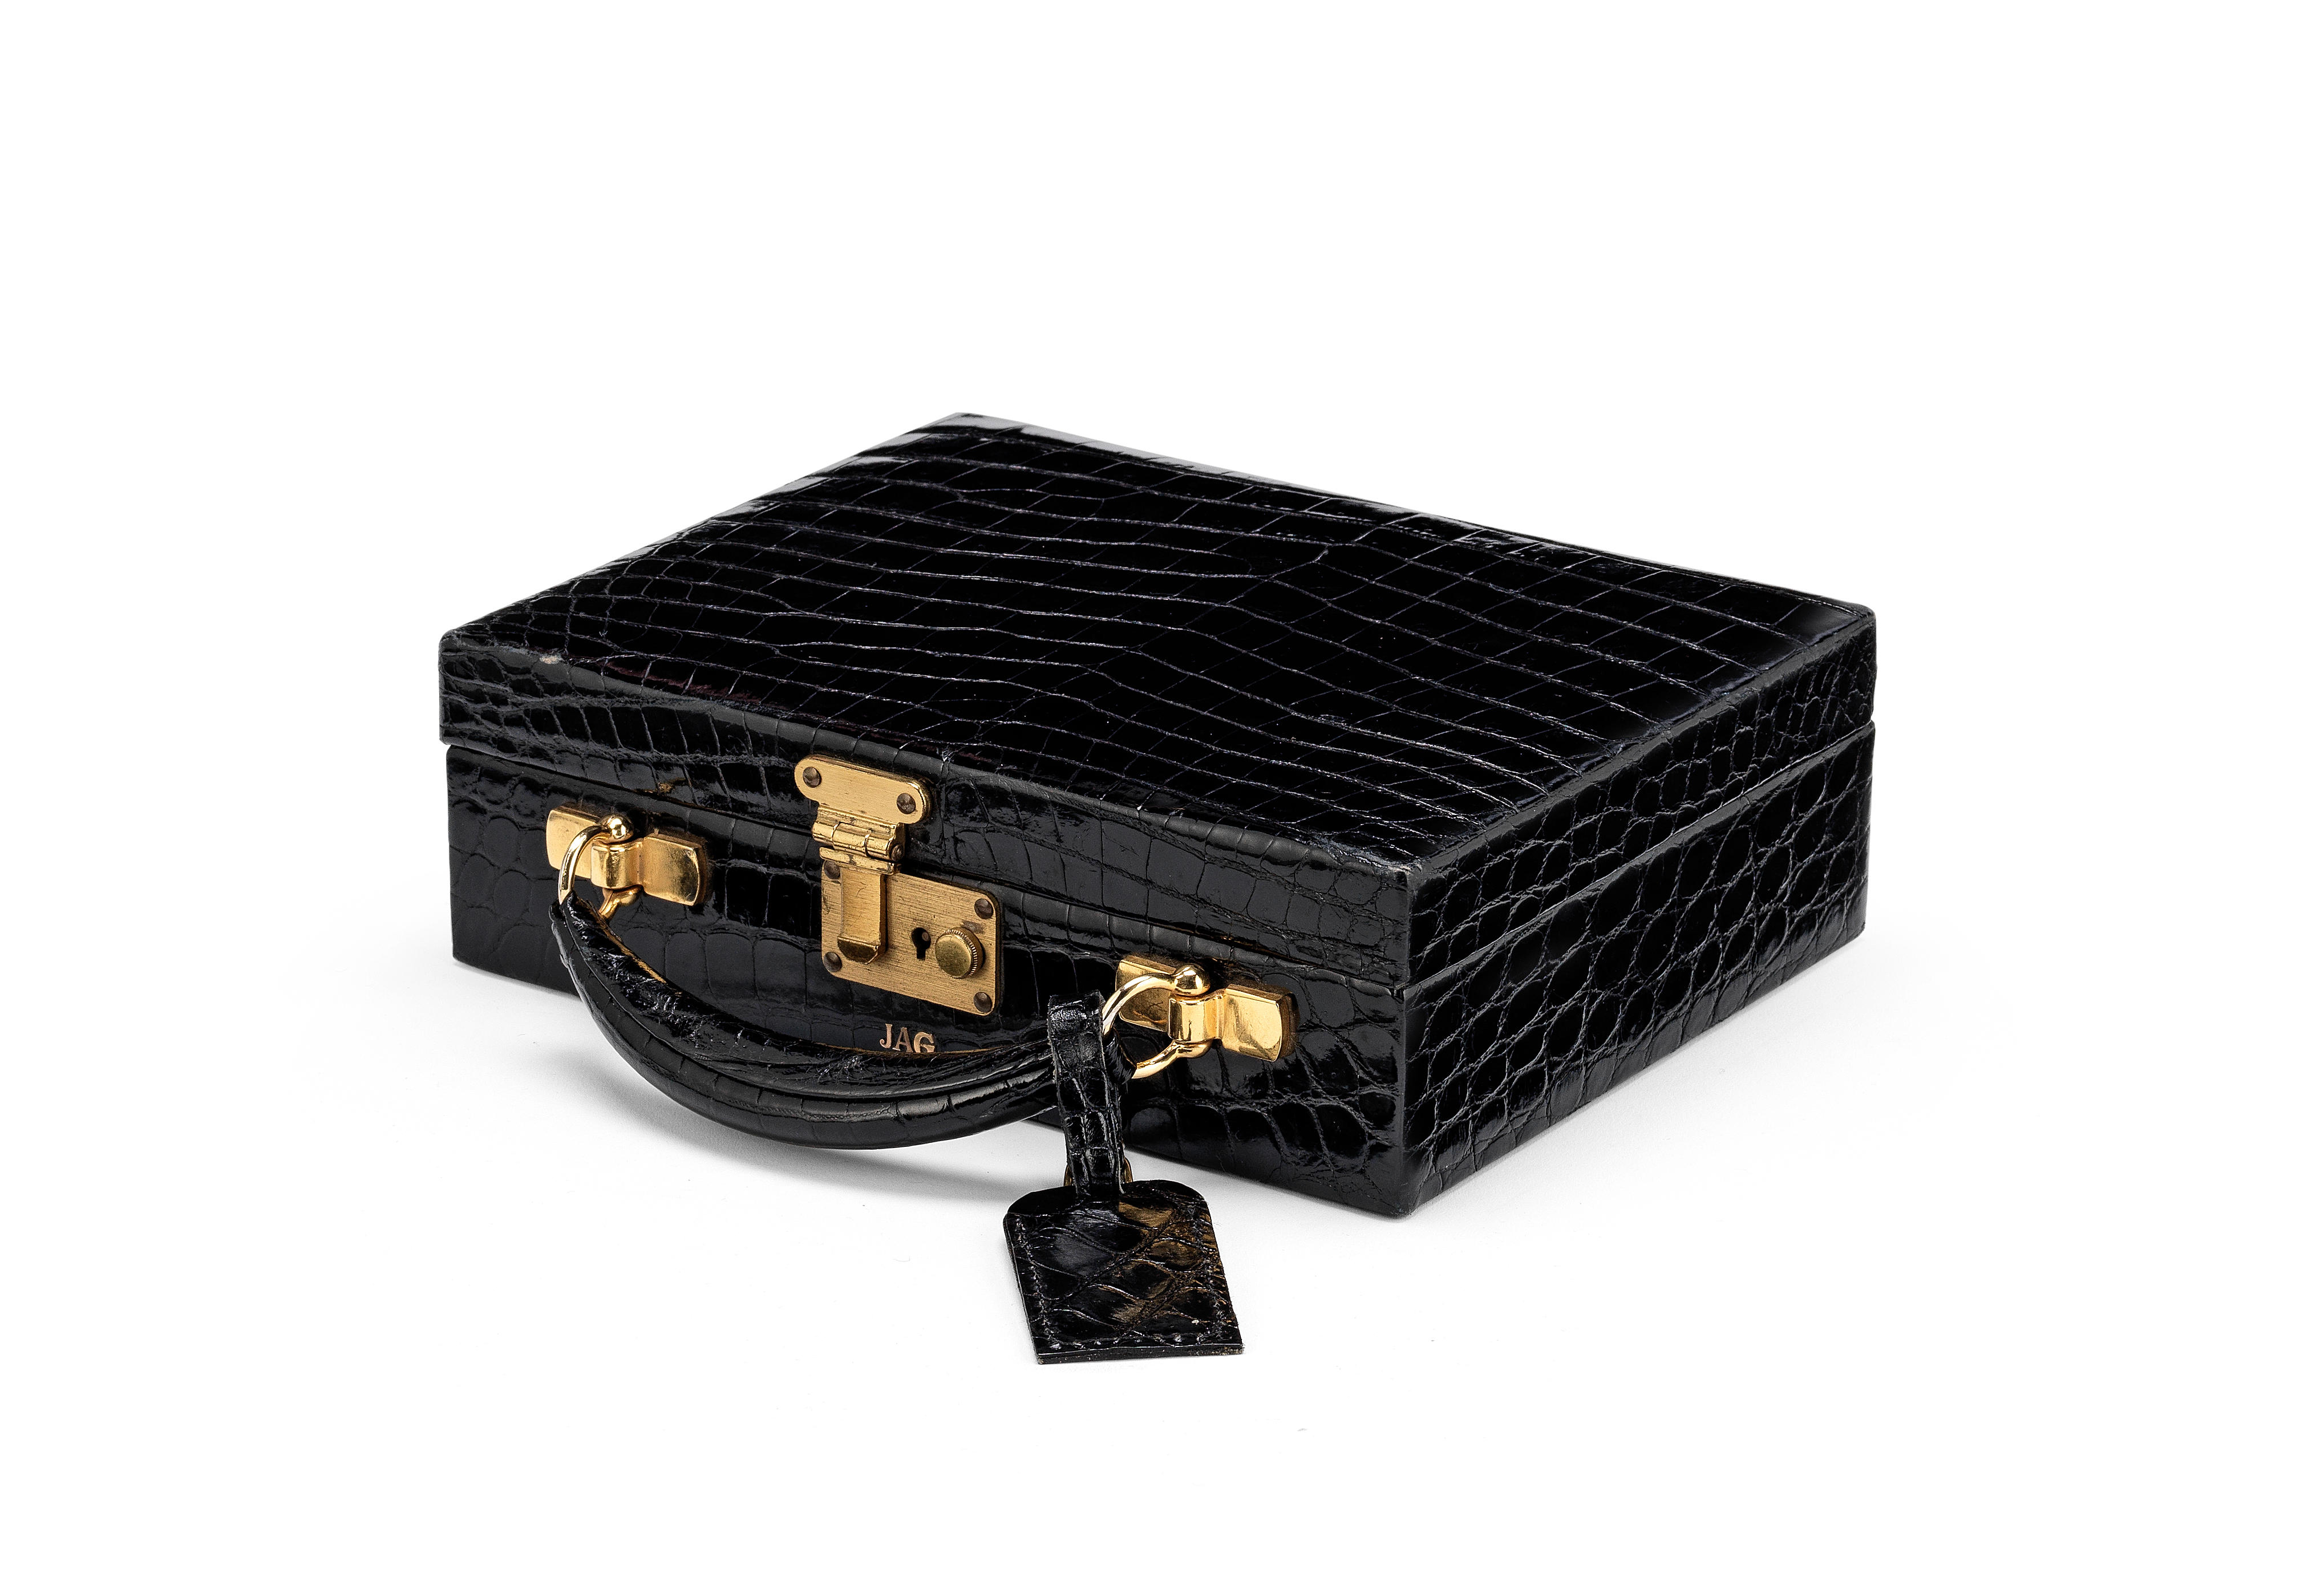 Bonhams, London, UK. 16 April 2021. Designer handbags and travel sale at  Bonhams Knightsbridge showcases an array of luxury accessories for a  stylish post-lockdown expedition – including a selection of classic and